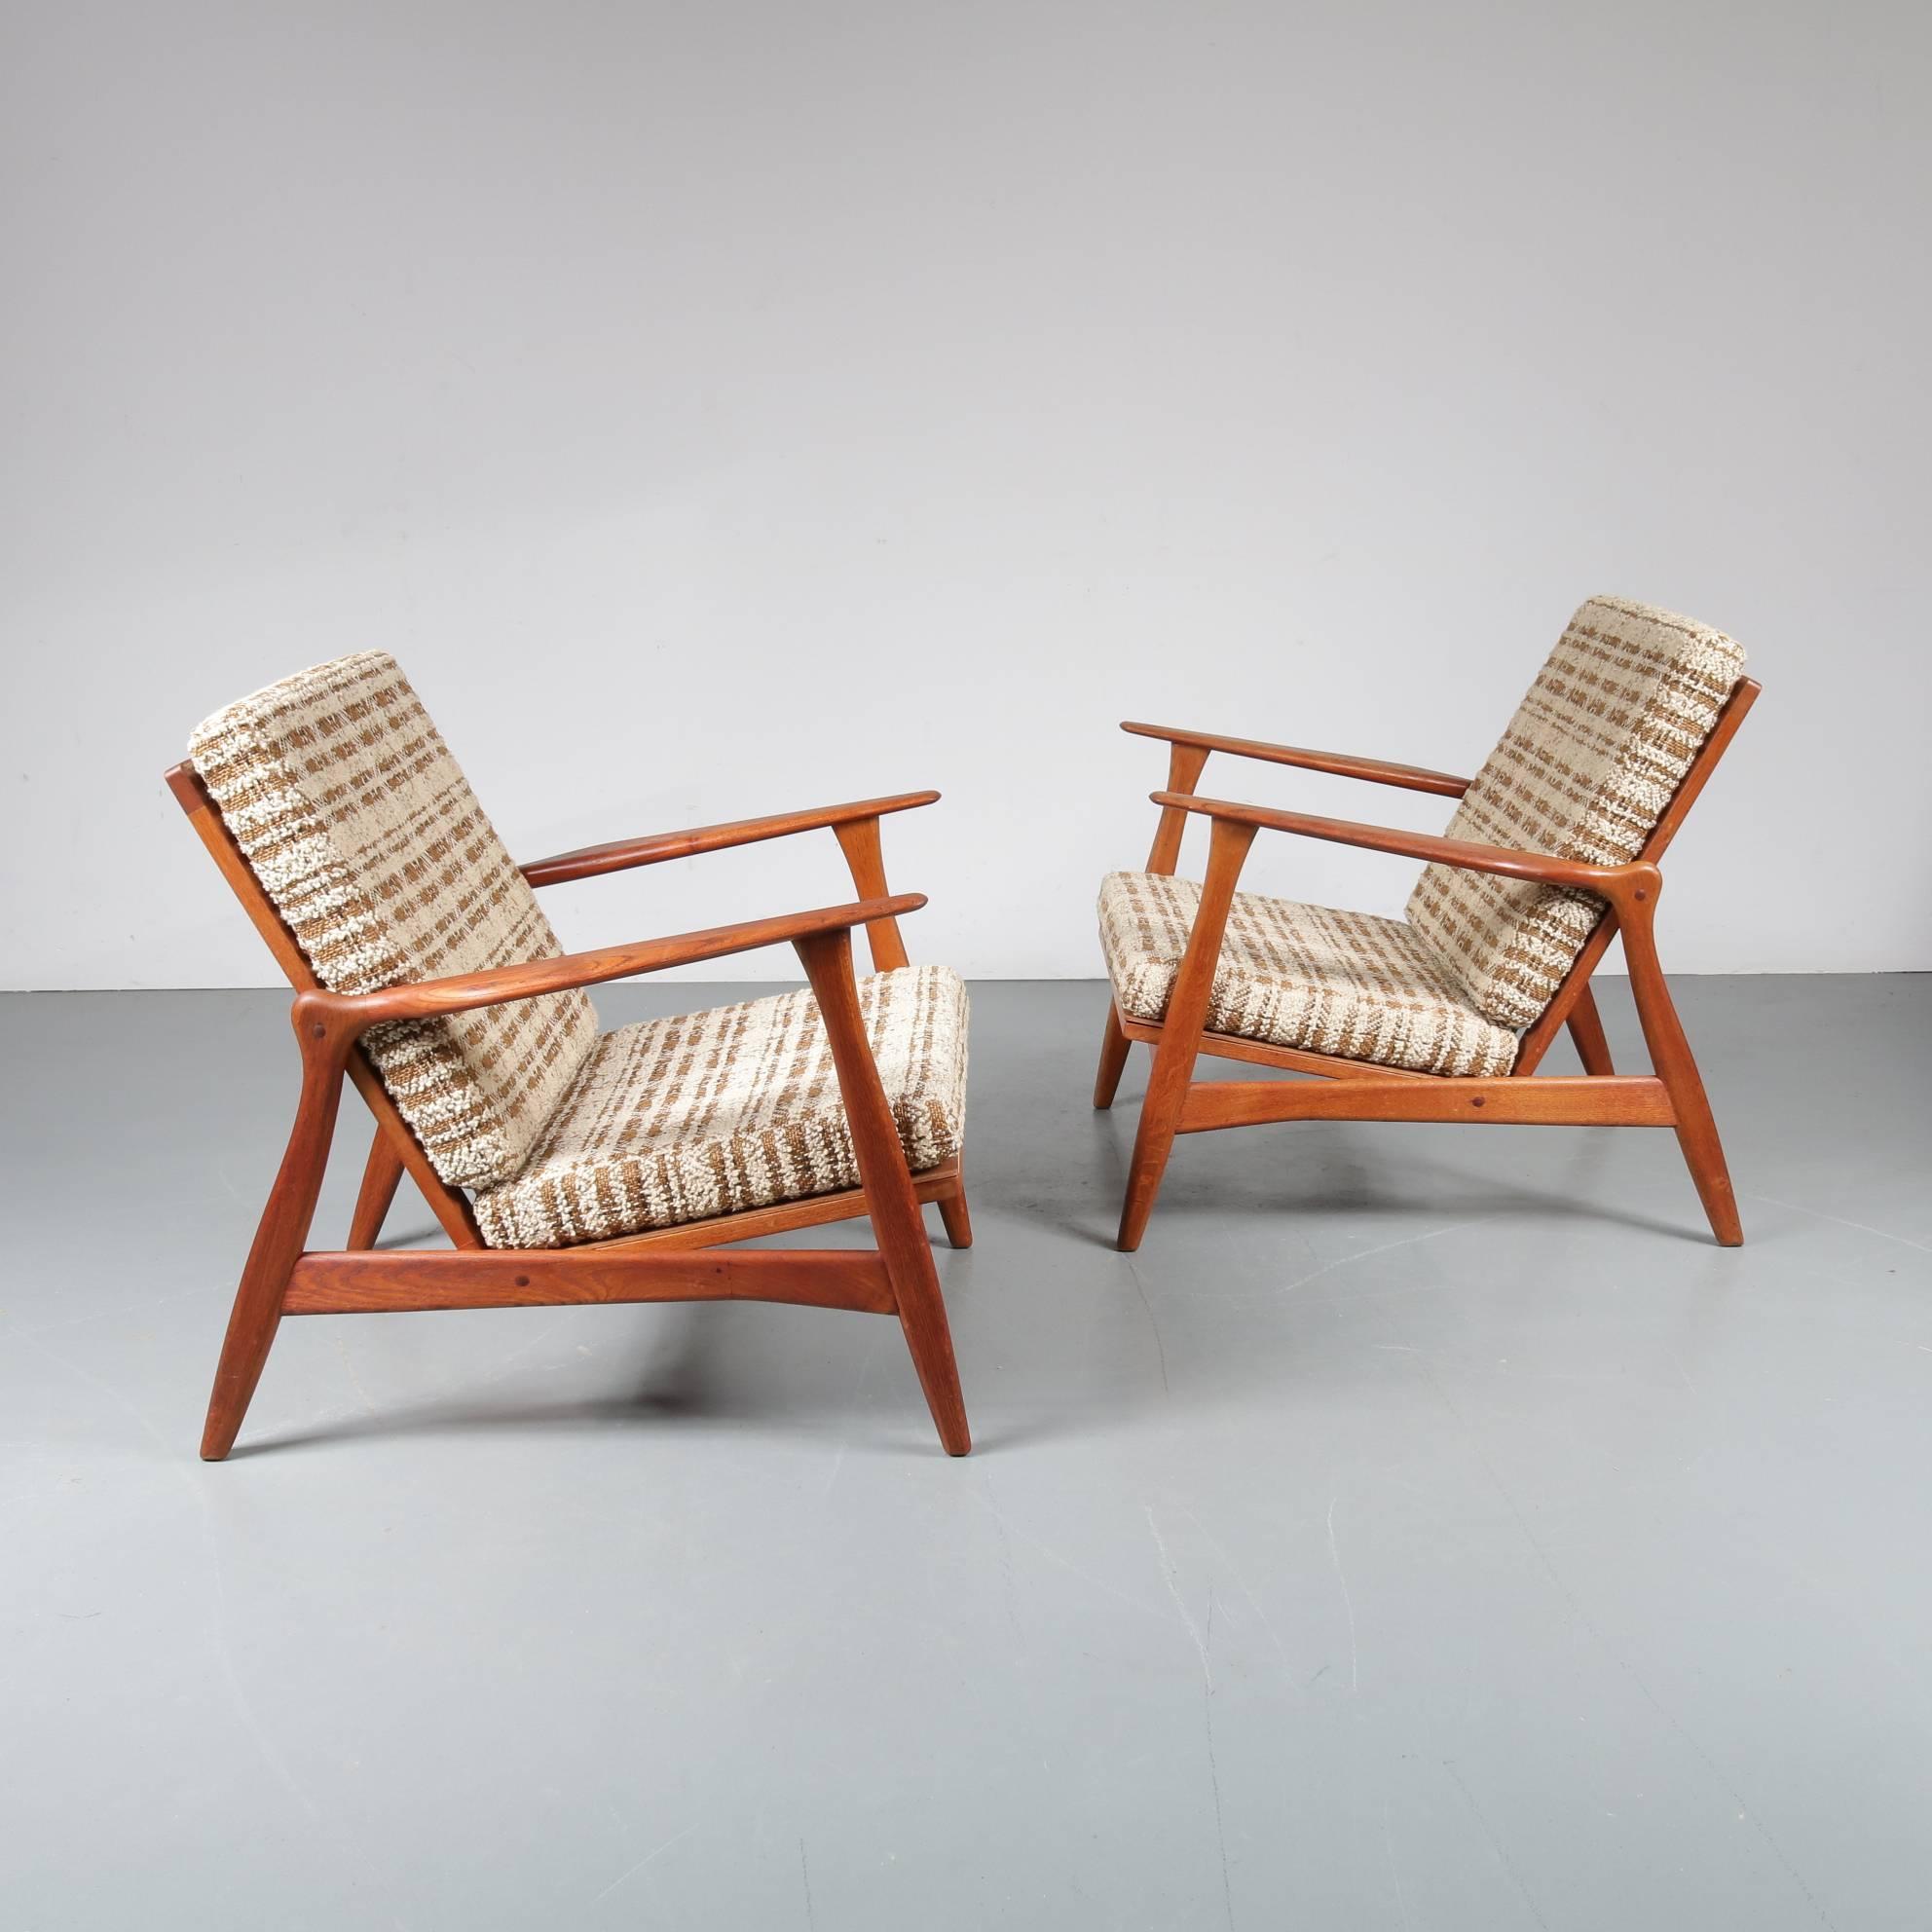 A beautiful pair of very rare lounge chairs designed by Arne Hovmand Olsen, produced by Mogens Kold in Denmark around 1950.

These chairs are perfect examples of quality midcentury Danish design! Made of high quality warm brown colored teak wood,